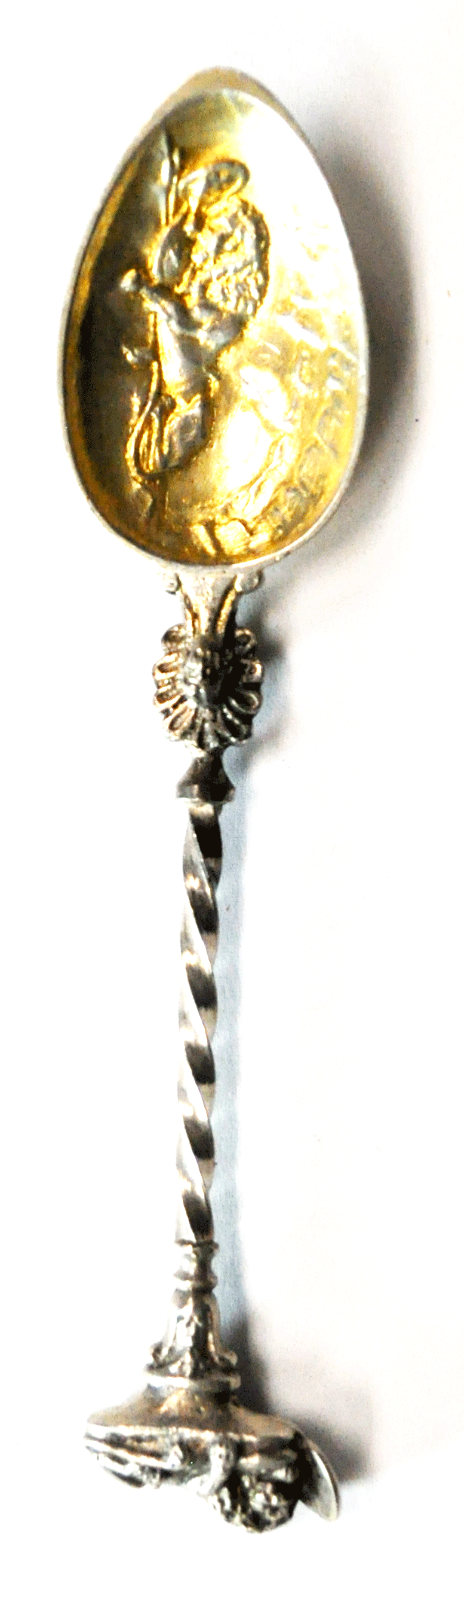 Silver Plated Gold Wash Laying Lion Twist Handle Souvenir Spoon 4-3/8"